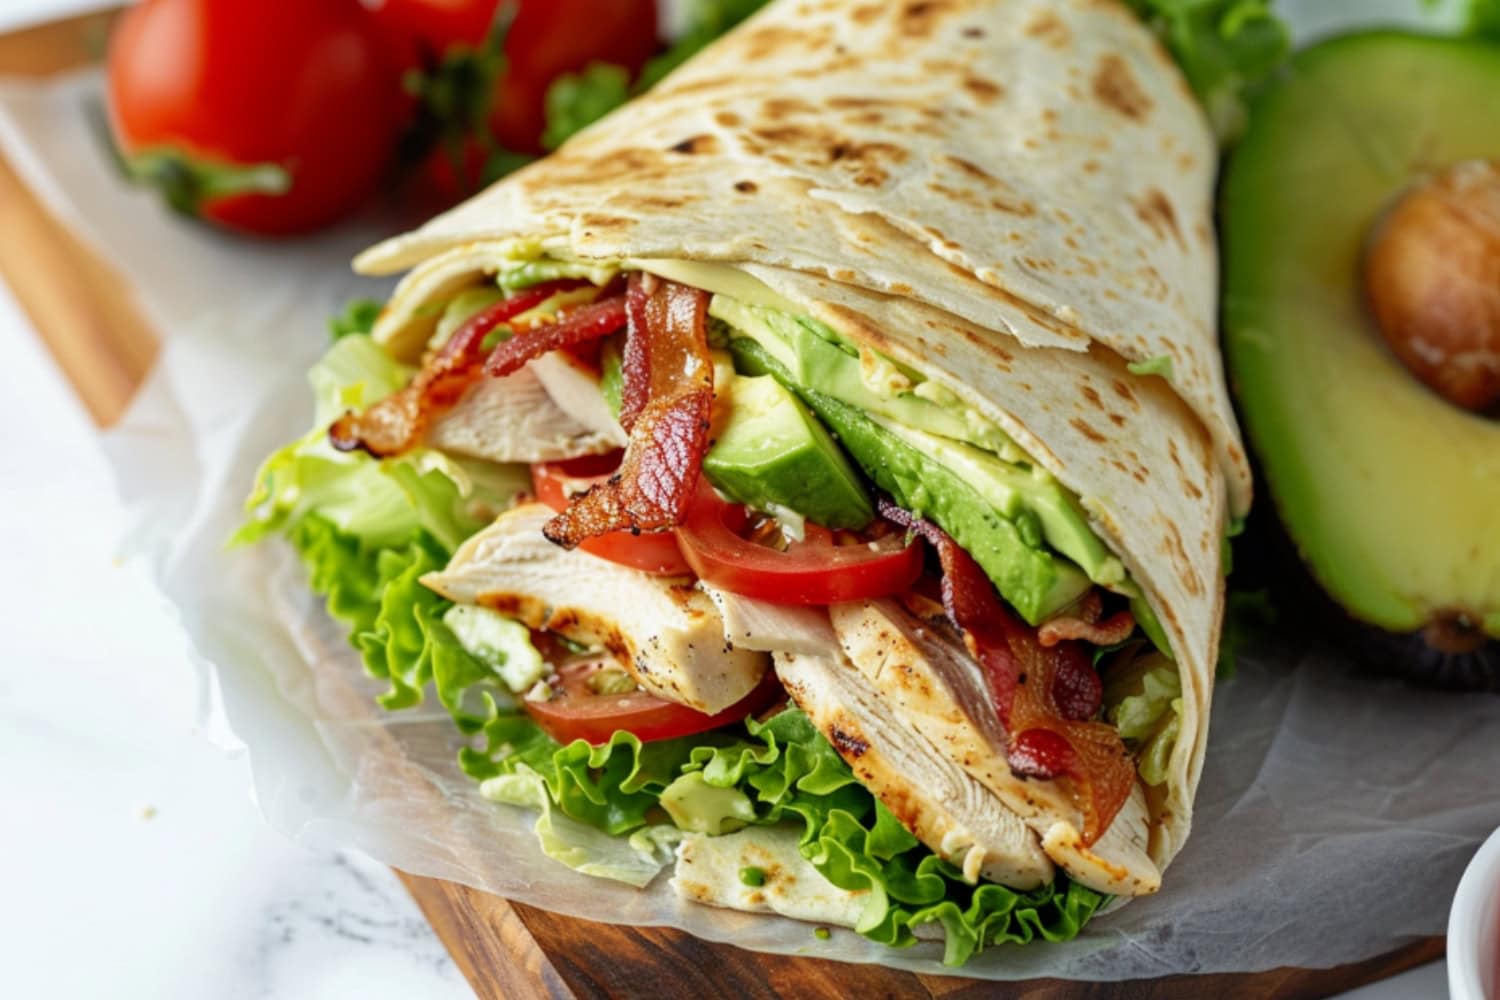 Chicken club wrap made with crisp lettuce, ripe avocado, juicy tomatoes, and crispy bacon in a soft tortilla wrap.